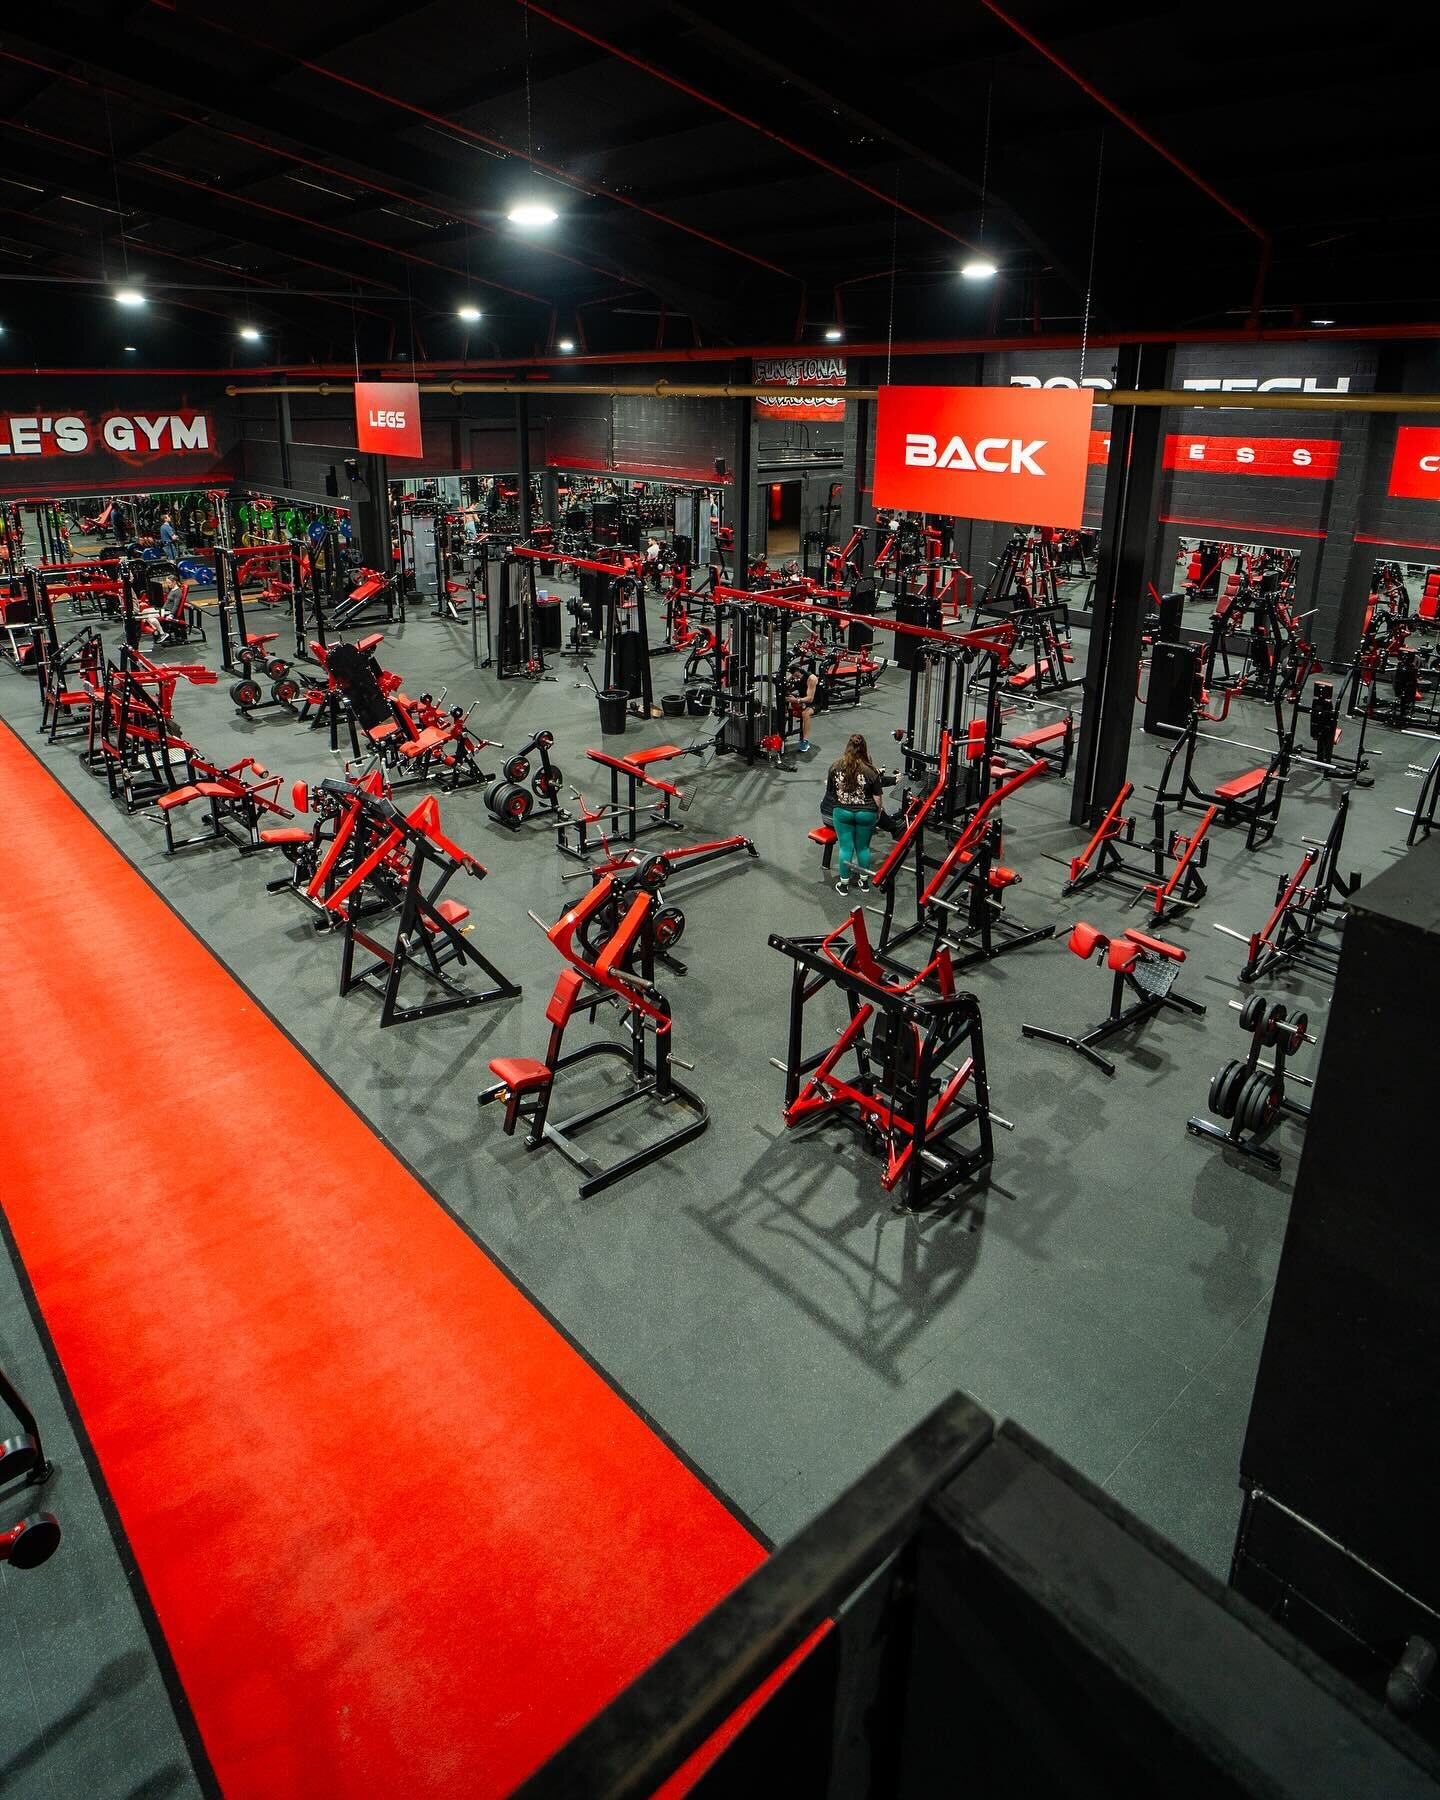 😍 We hope you&rsquo;ve had a great Easter Weekend! Who&rsquo;s back to it tomorrow? 👀❤️ Open 24/7, we look forward to seeing you soon! #thepeoplesgym